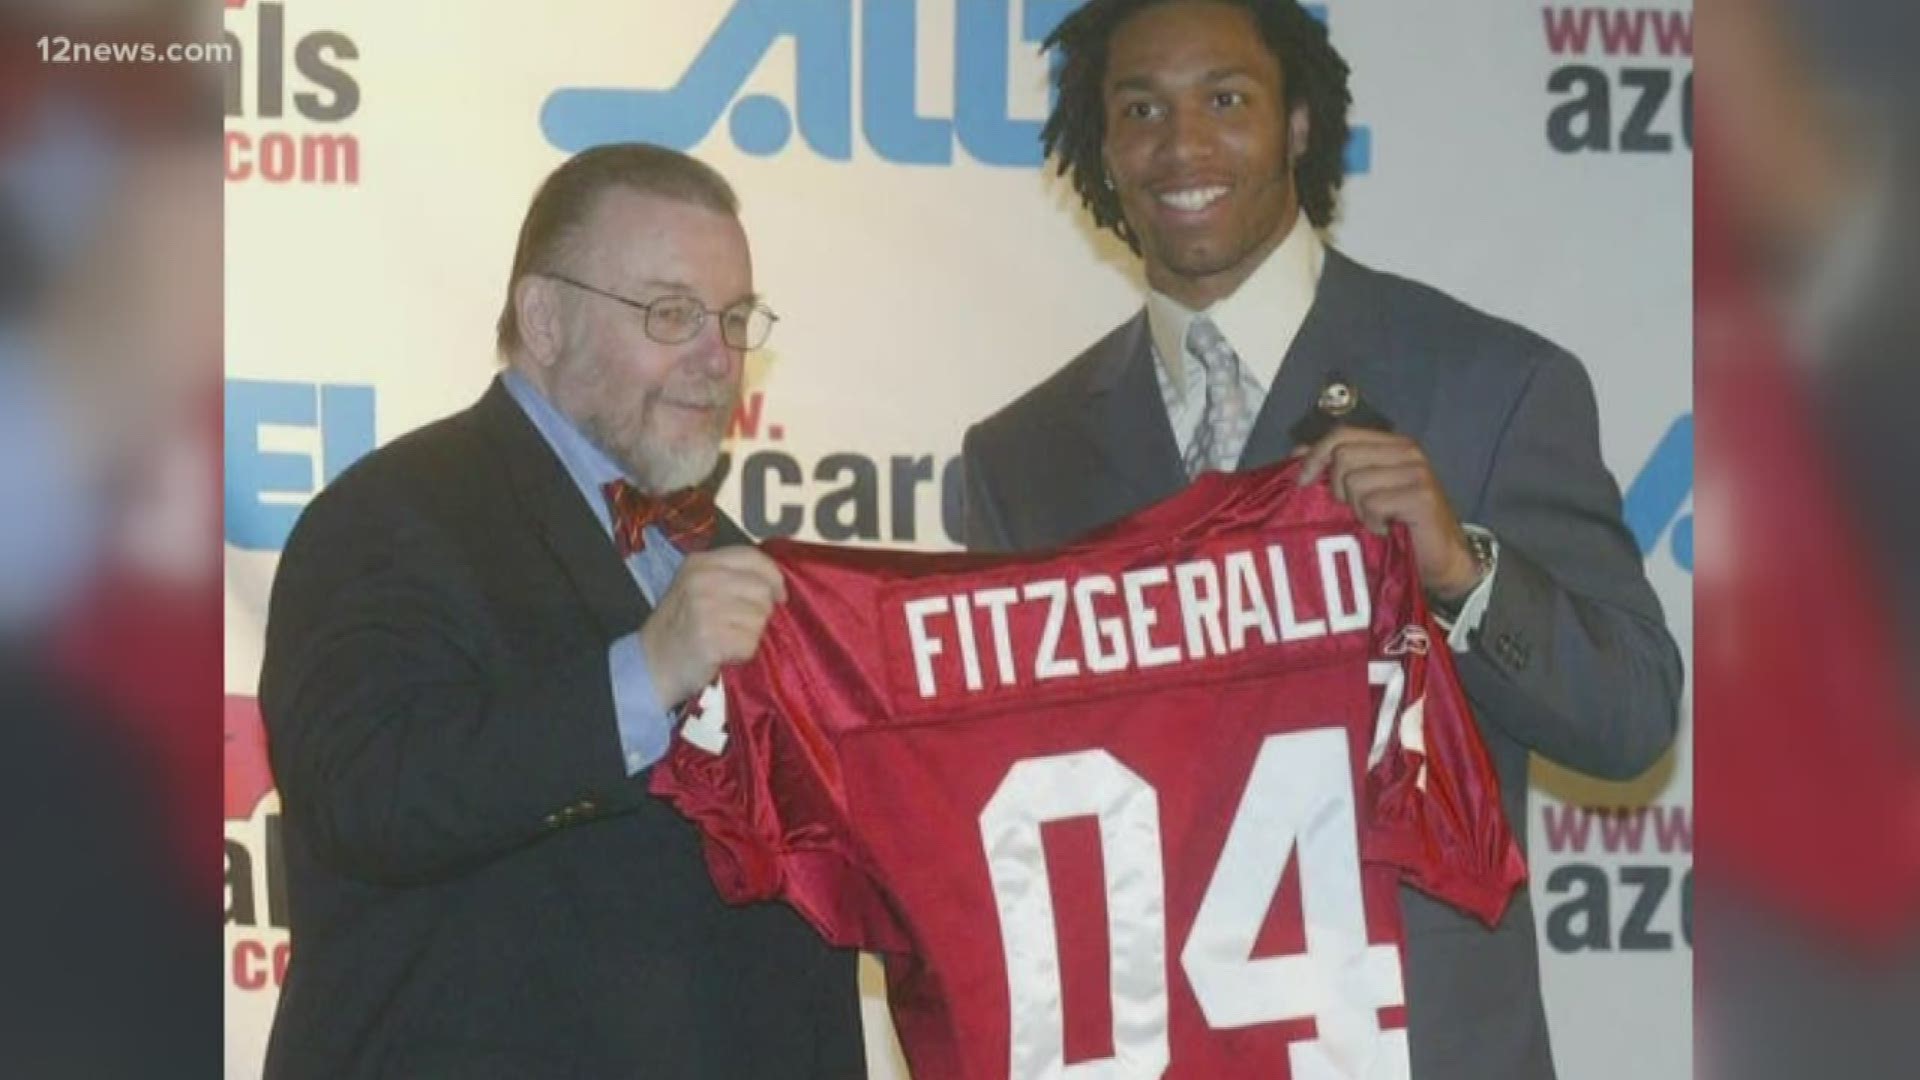 Fitz's arrival in the Valley 16 years ago was a memorable moment for Cardinals fans. We went around the newsroom to see what life was like for us way back then.